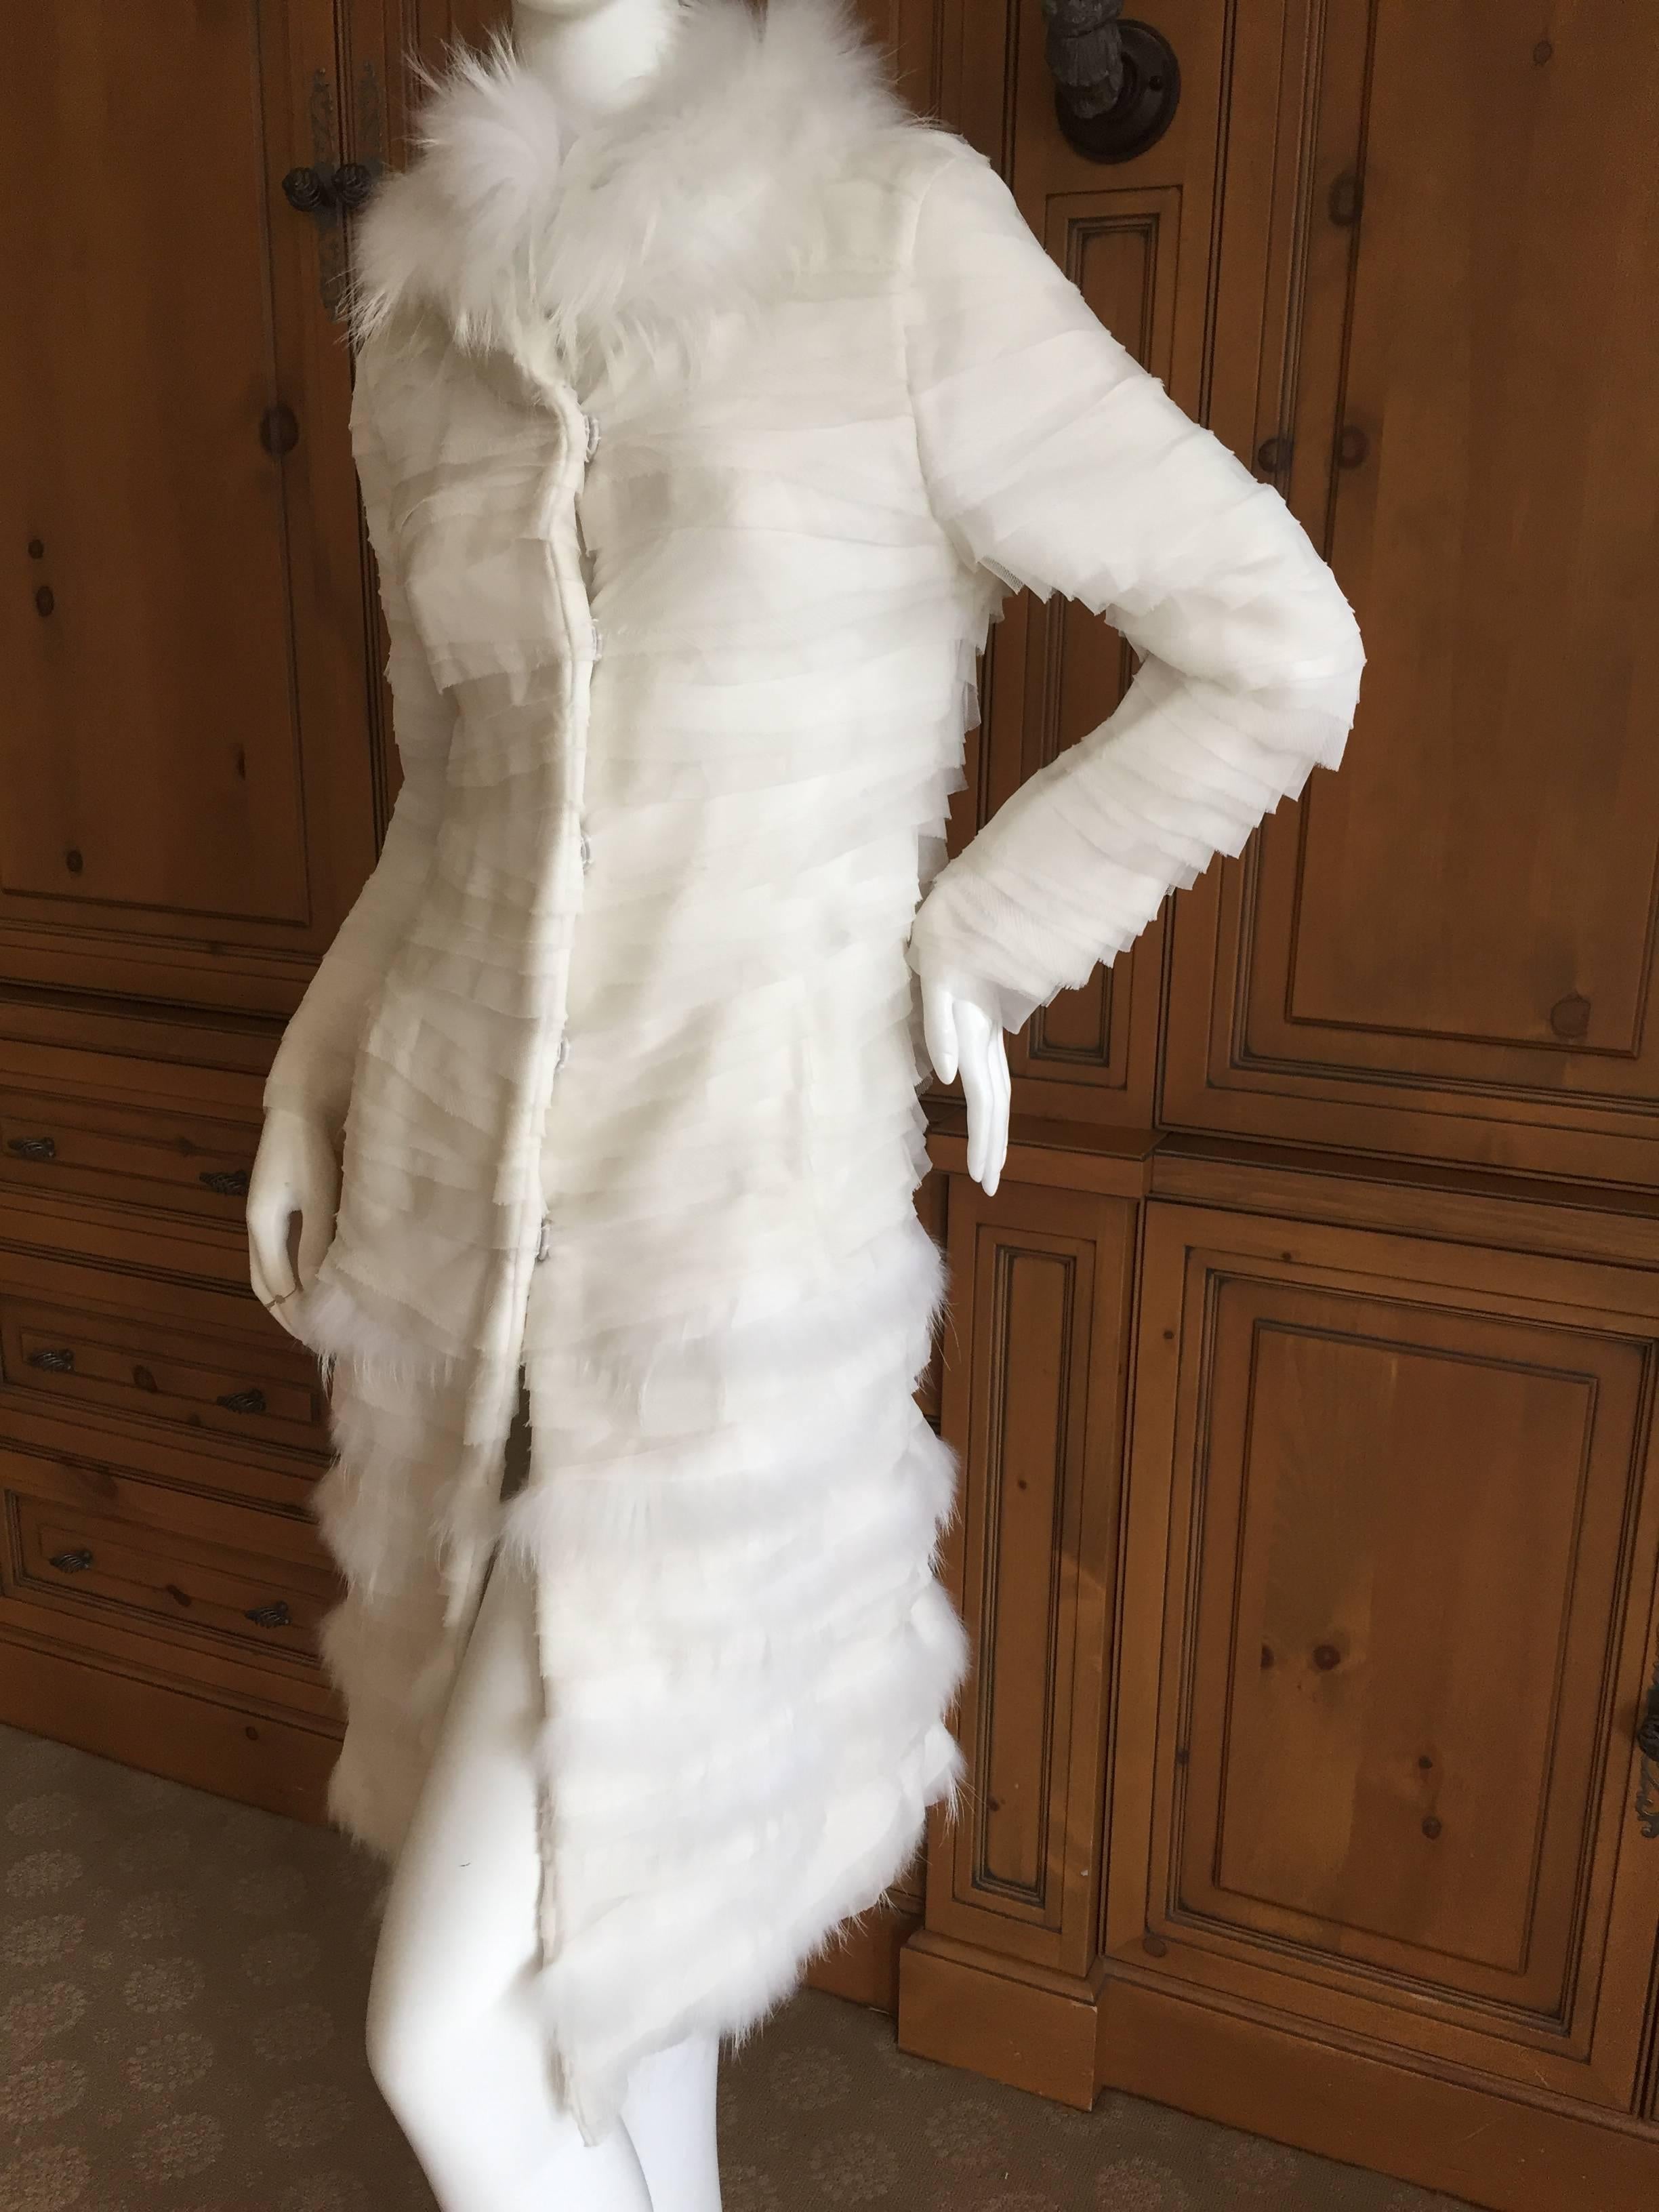 Beautiful Oscar de la Renta Luxurious White Fur Trimmed Tiered Silk Coat .
Layers of white silk alternating with delicate white fur
Size 2-4
This is such a pretty piece, the photos don't quite capture its charms.

Bust 36